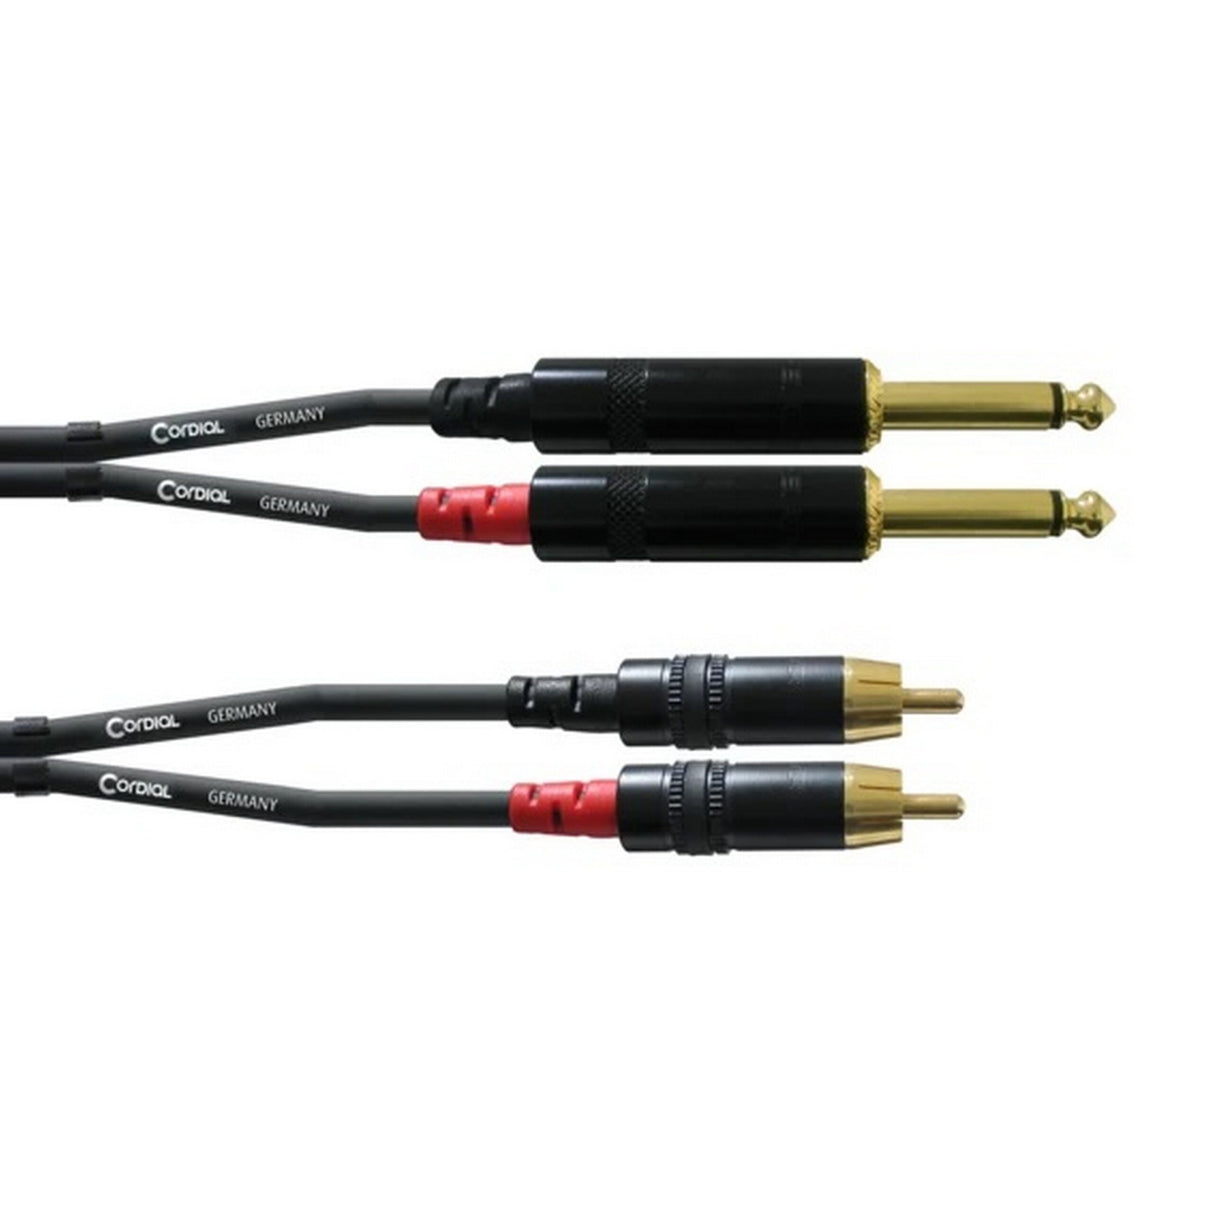 Cordial CFU 0.9 PC 2 x 1/4-Inch to 2 x RCA Twin Cable/Adapter, Black, 3-Feet